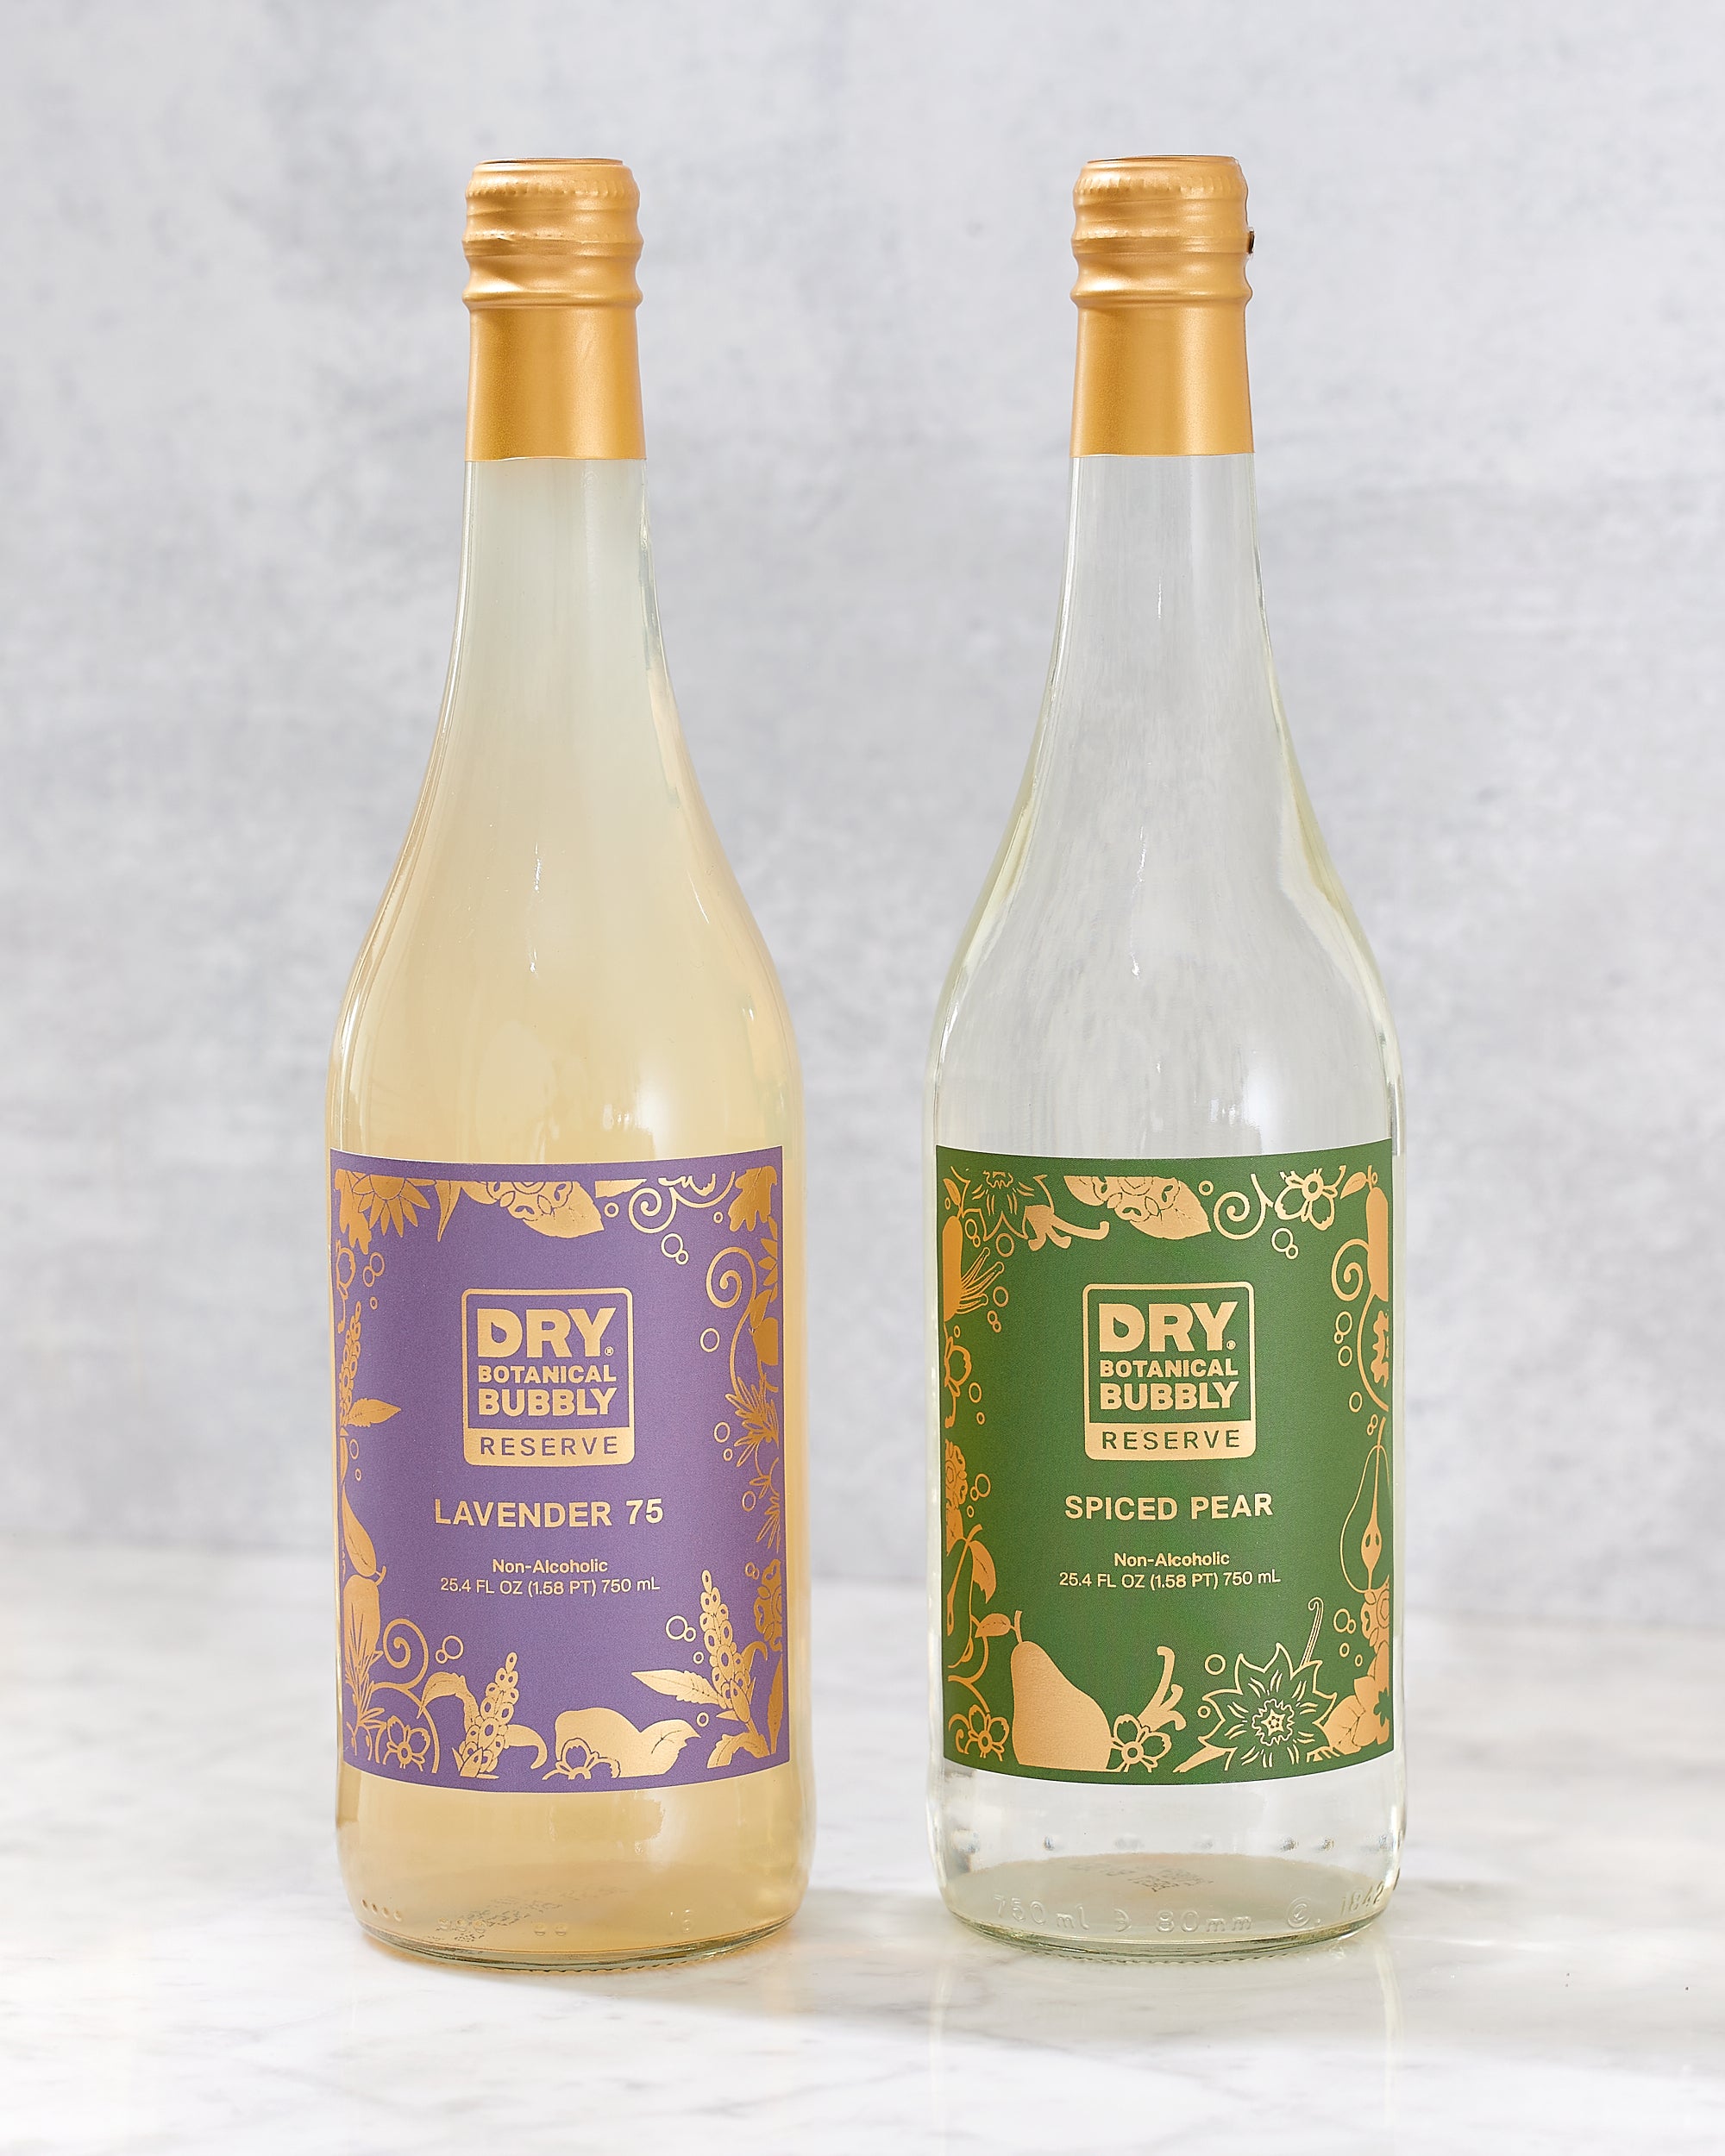 DRY Botanical Bubbly Reserve Variety Pack (4 pack)